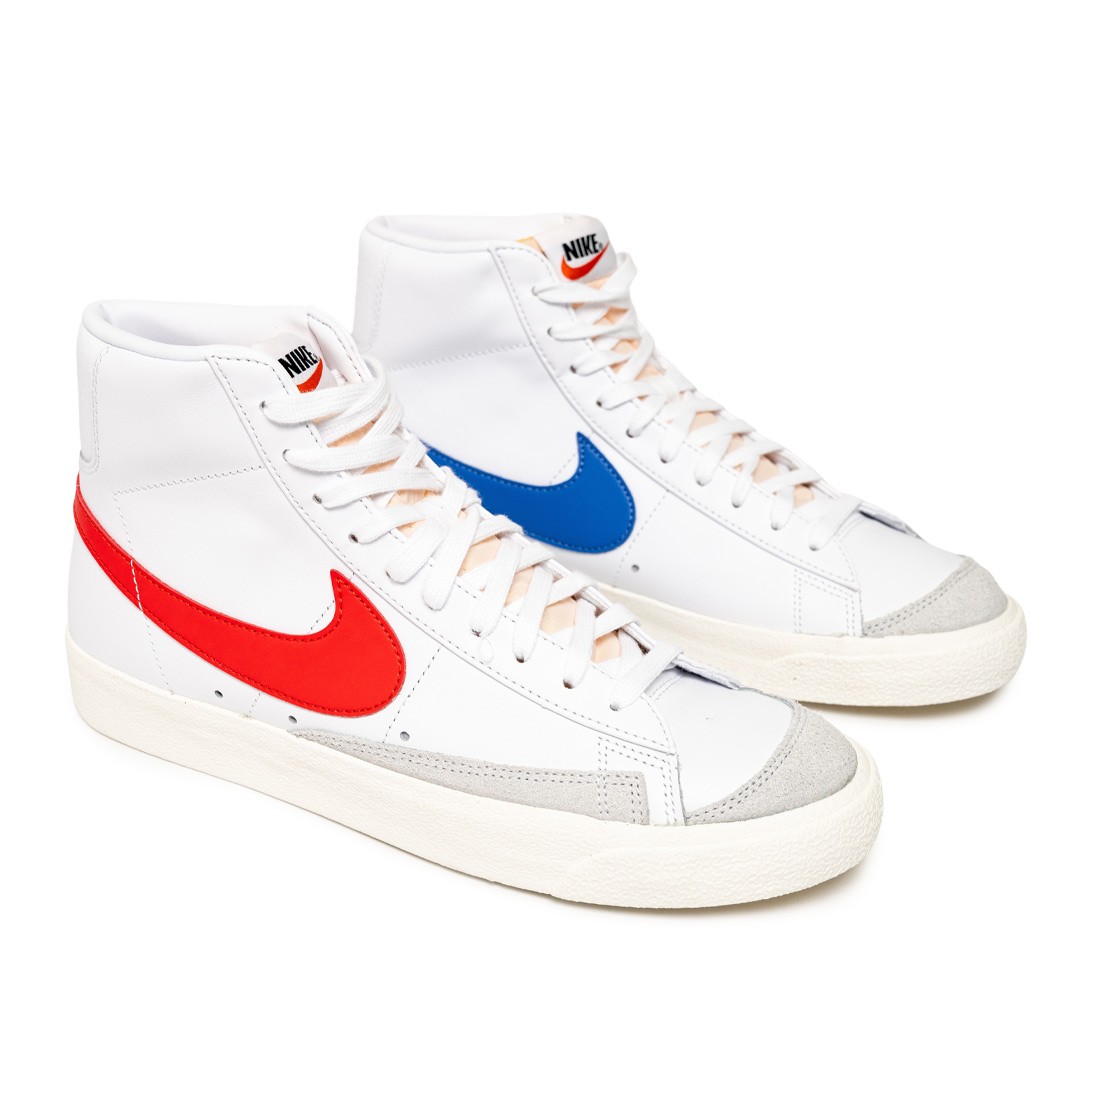 nike red and blue high tops